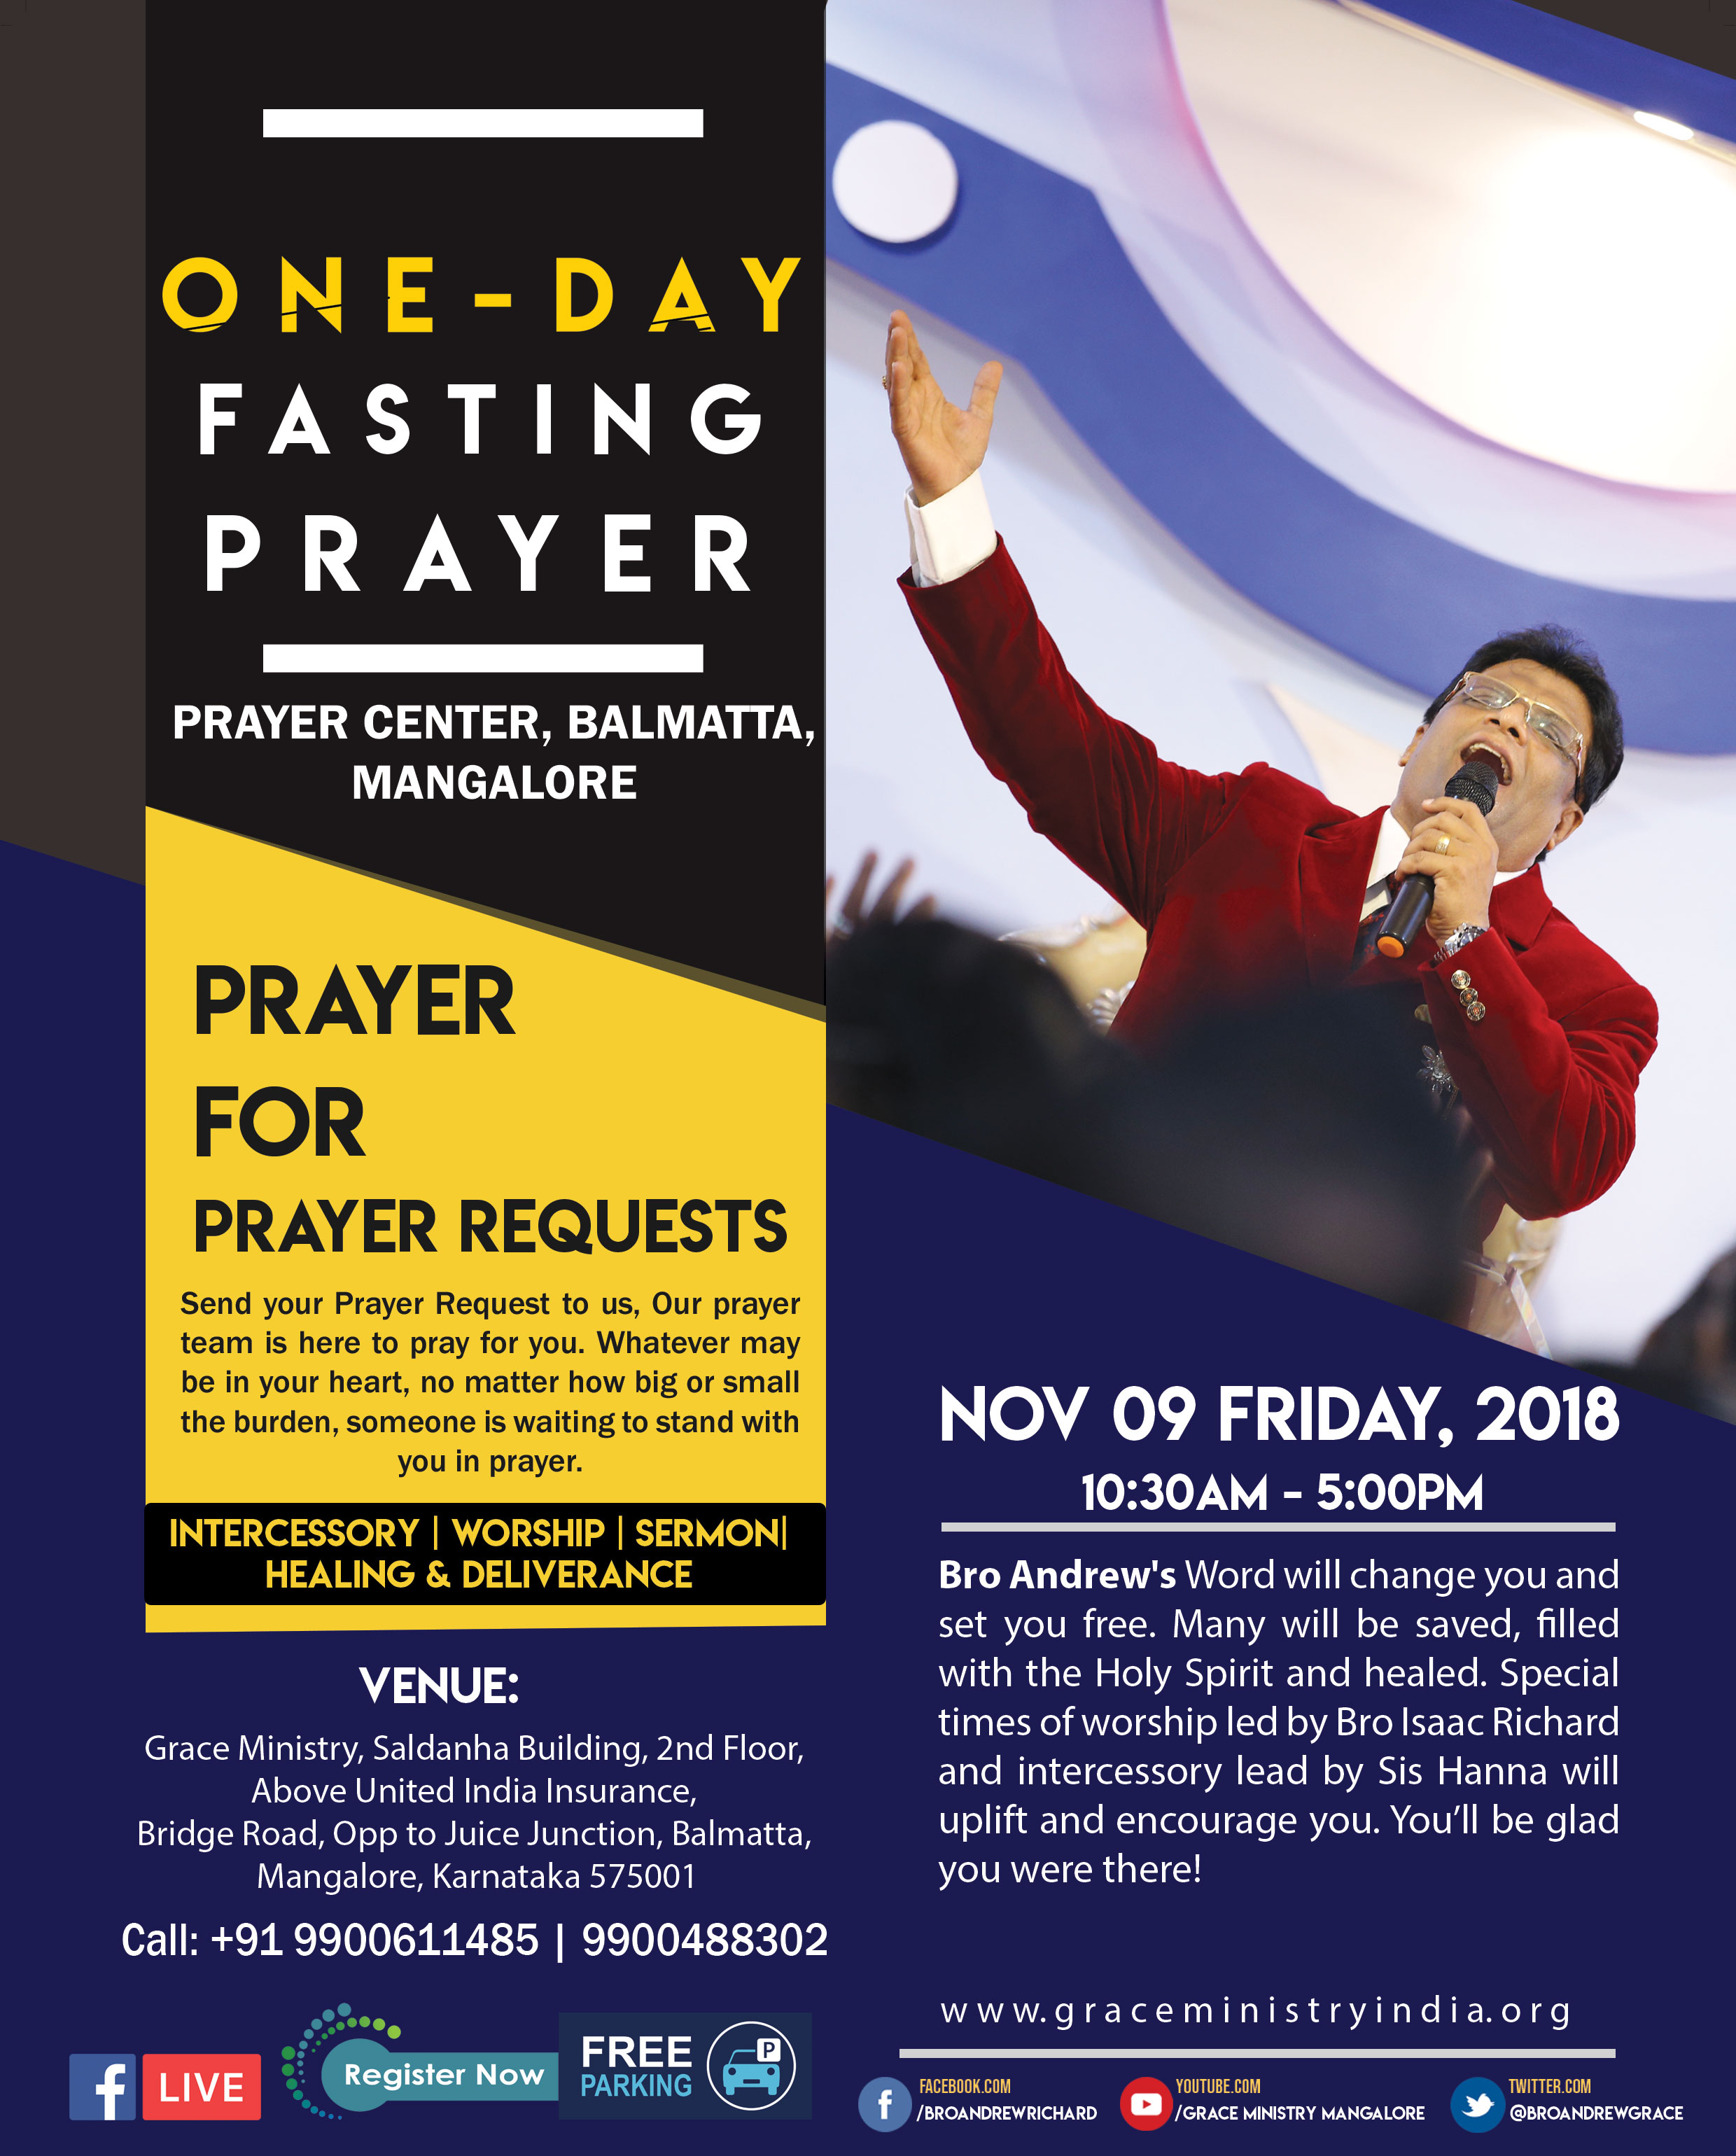 Join the One Day Fasting Prayer arranged by Grace Ministry to Prayer for all the Prayer Requests on Nov 09 Friday, 2018 at the Prayer Center in Balmatta, Mangalore. Come and be Blessed!